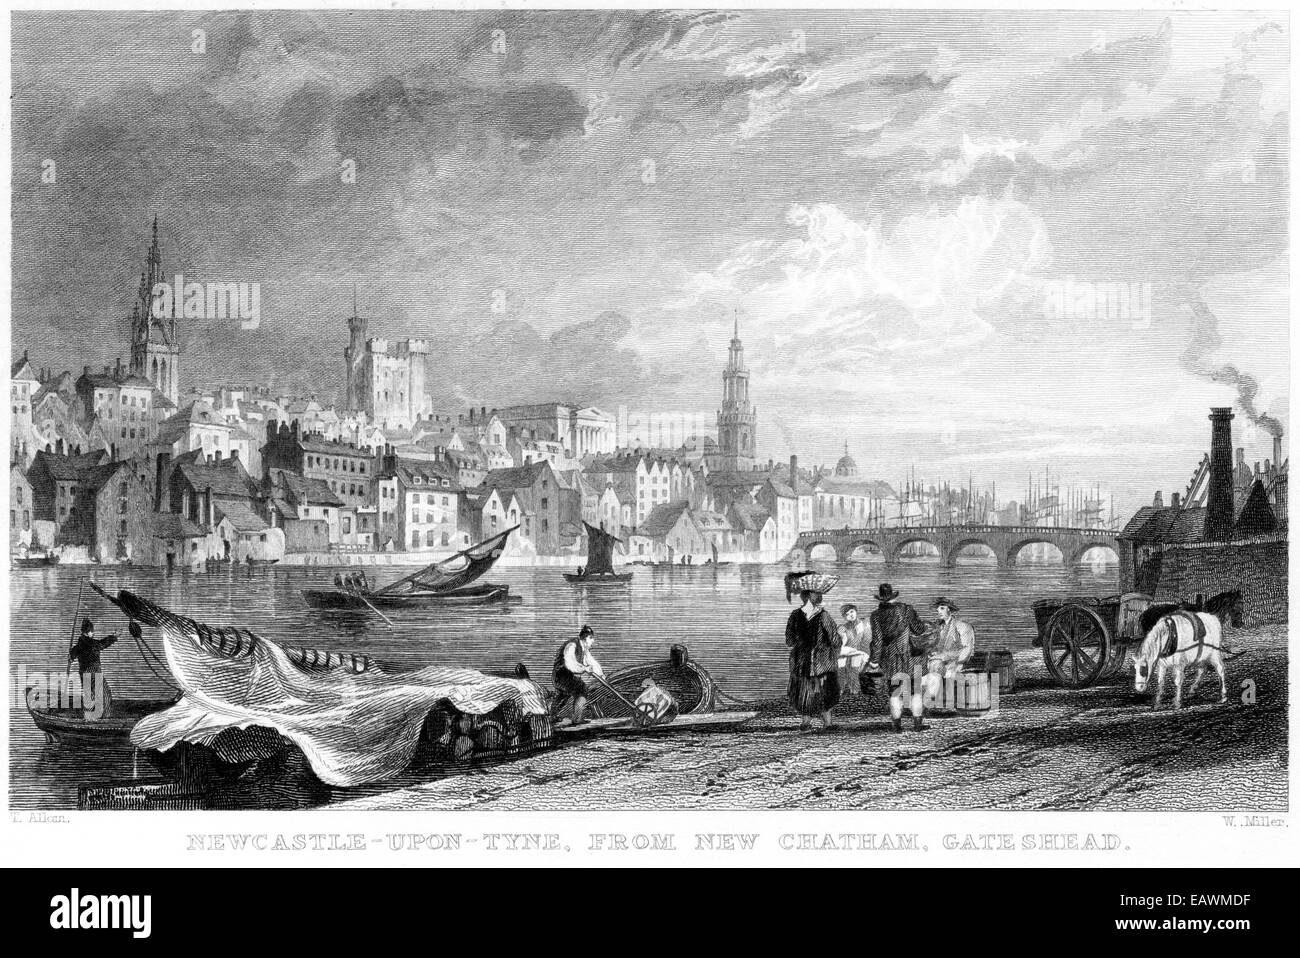 Engraving entitled 'Newcastle upon Tyne, from New Chatham, Gateshead' scanned at high resolution from a book published in 1834 Stock Photo